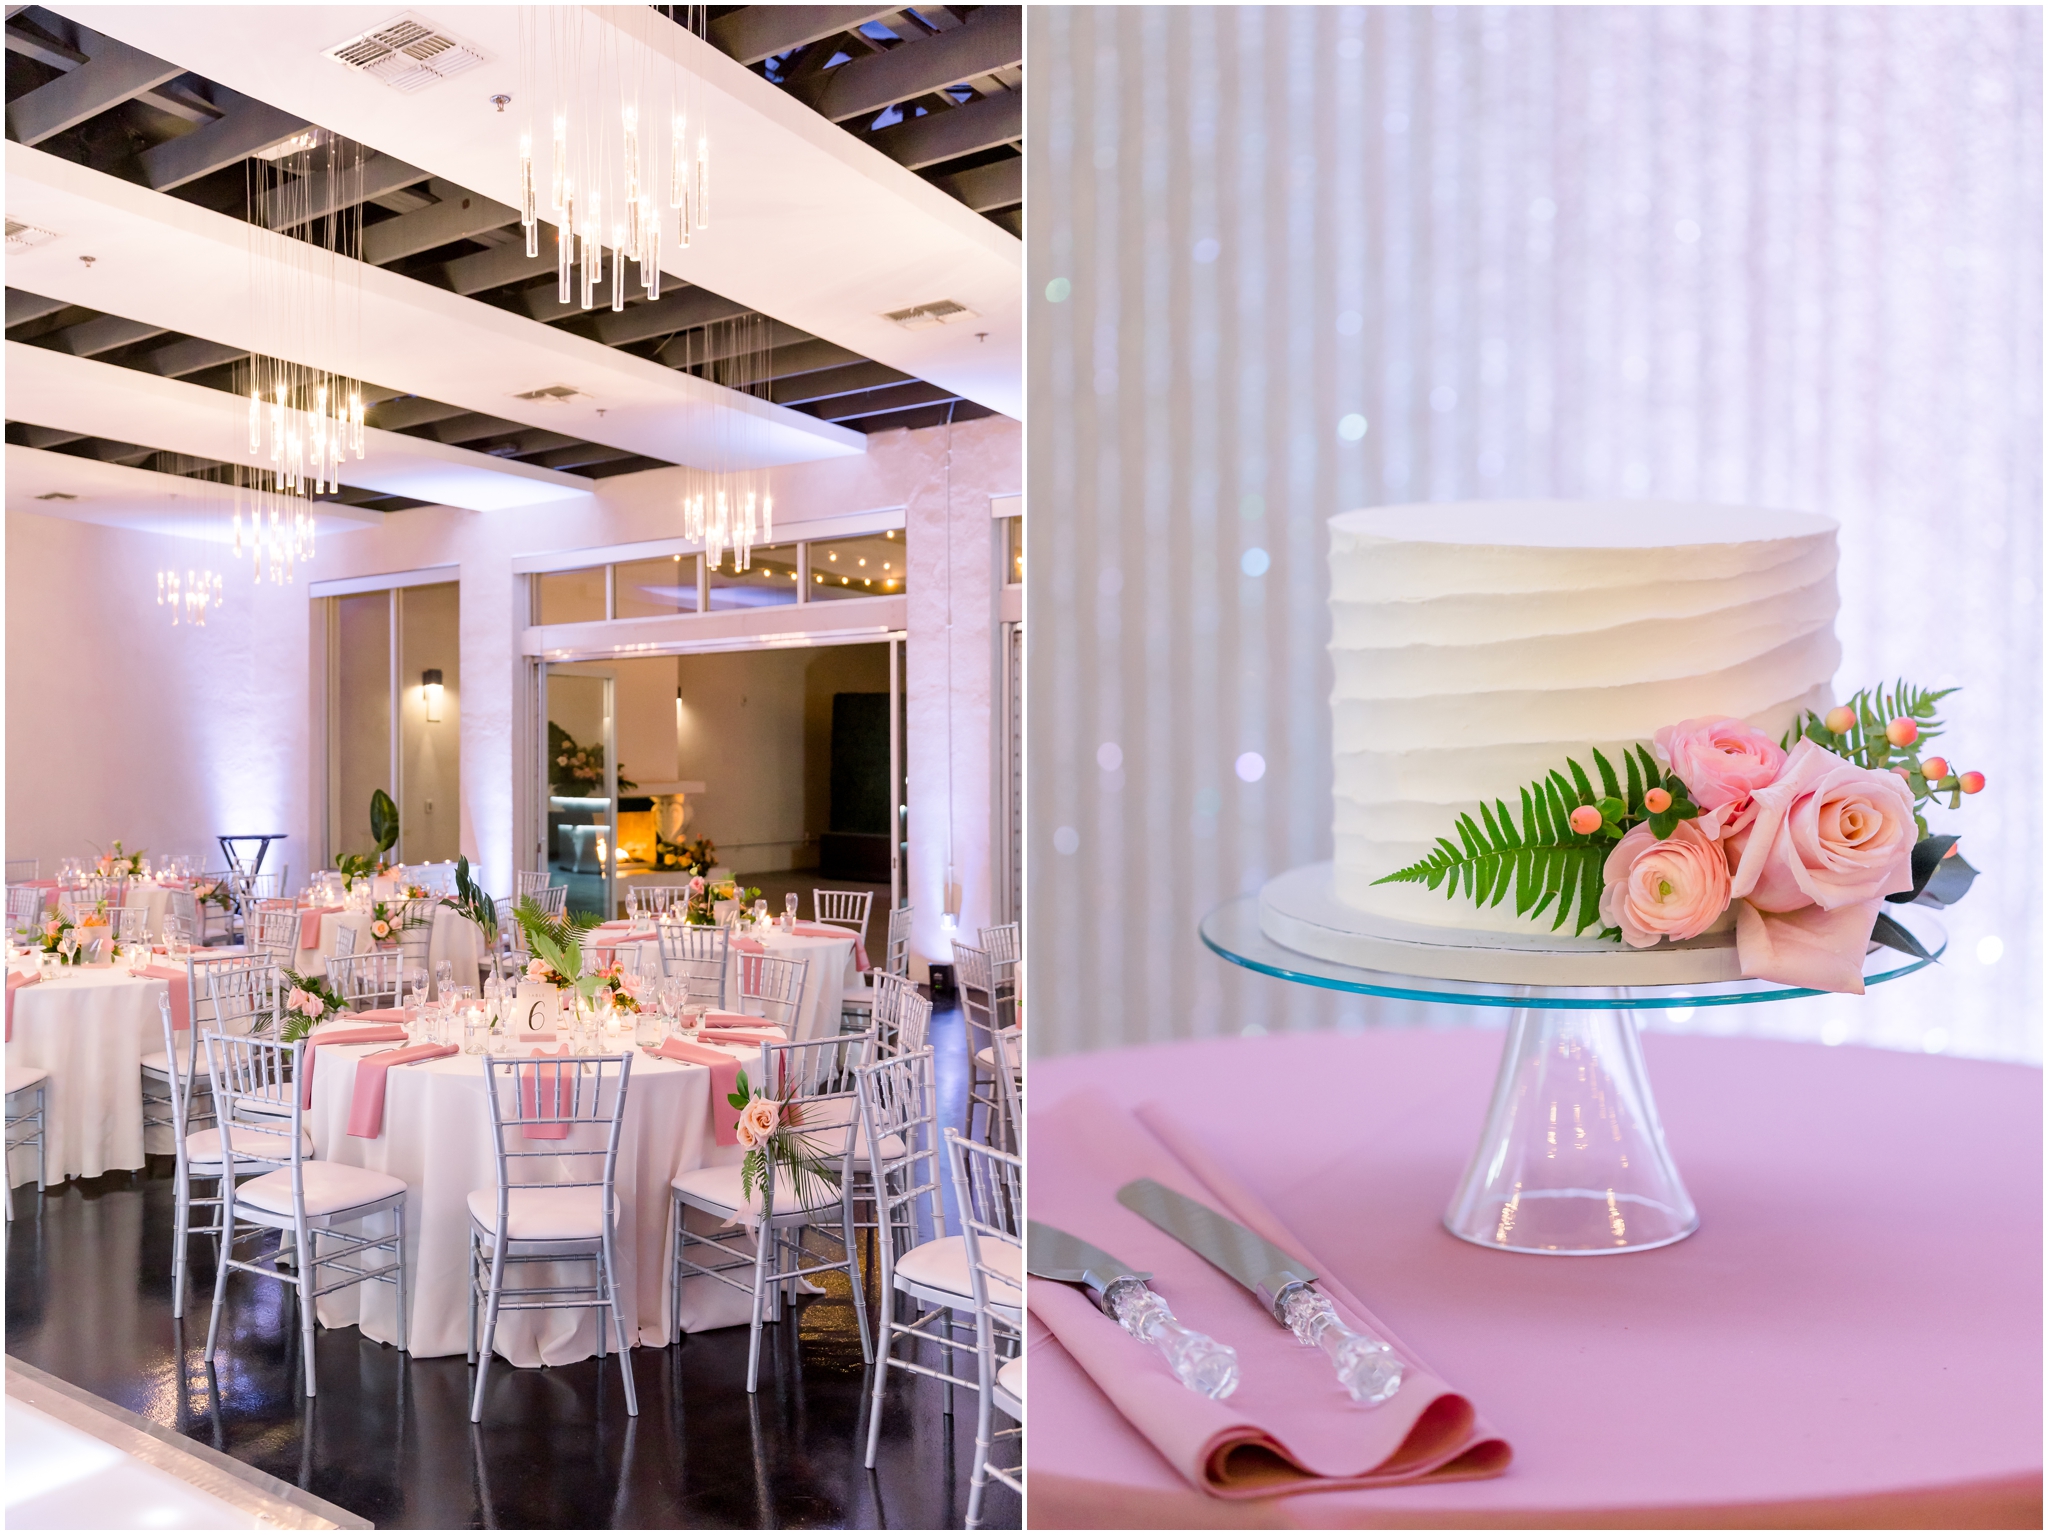 white wedding cake, pink flowers, pink table cloth, Tropical head table